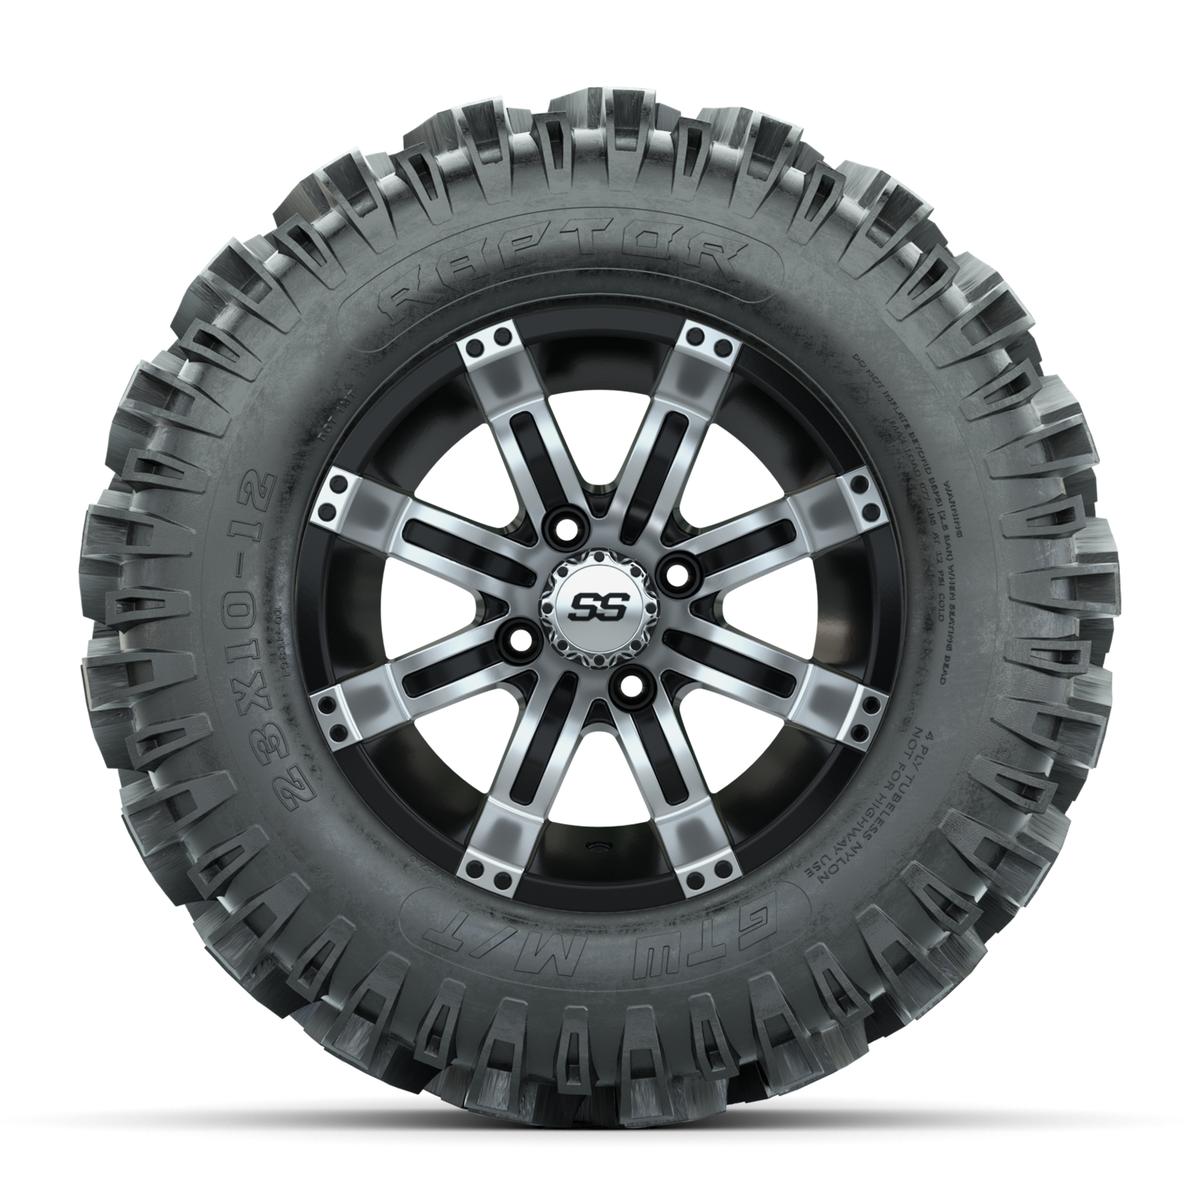 12” GTW Tempest Black and Machined Wheels with 23" Raptor Mud Tires – Set of 4